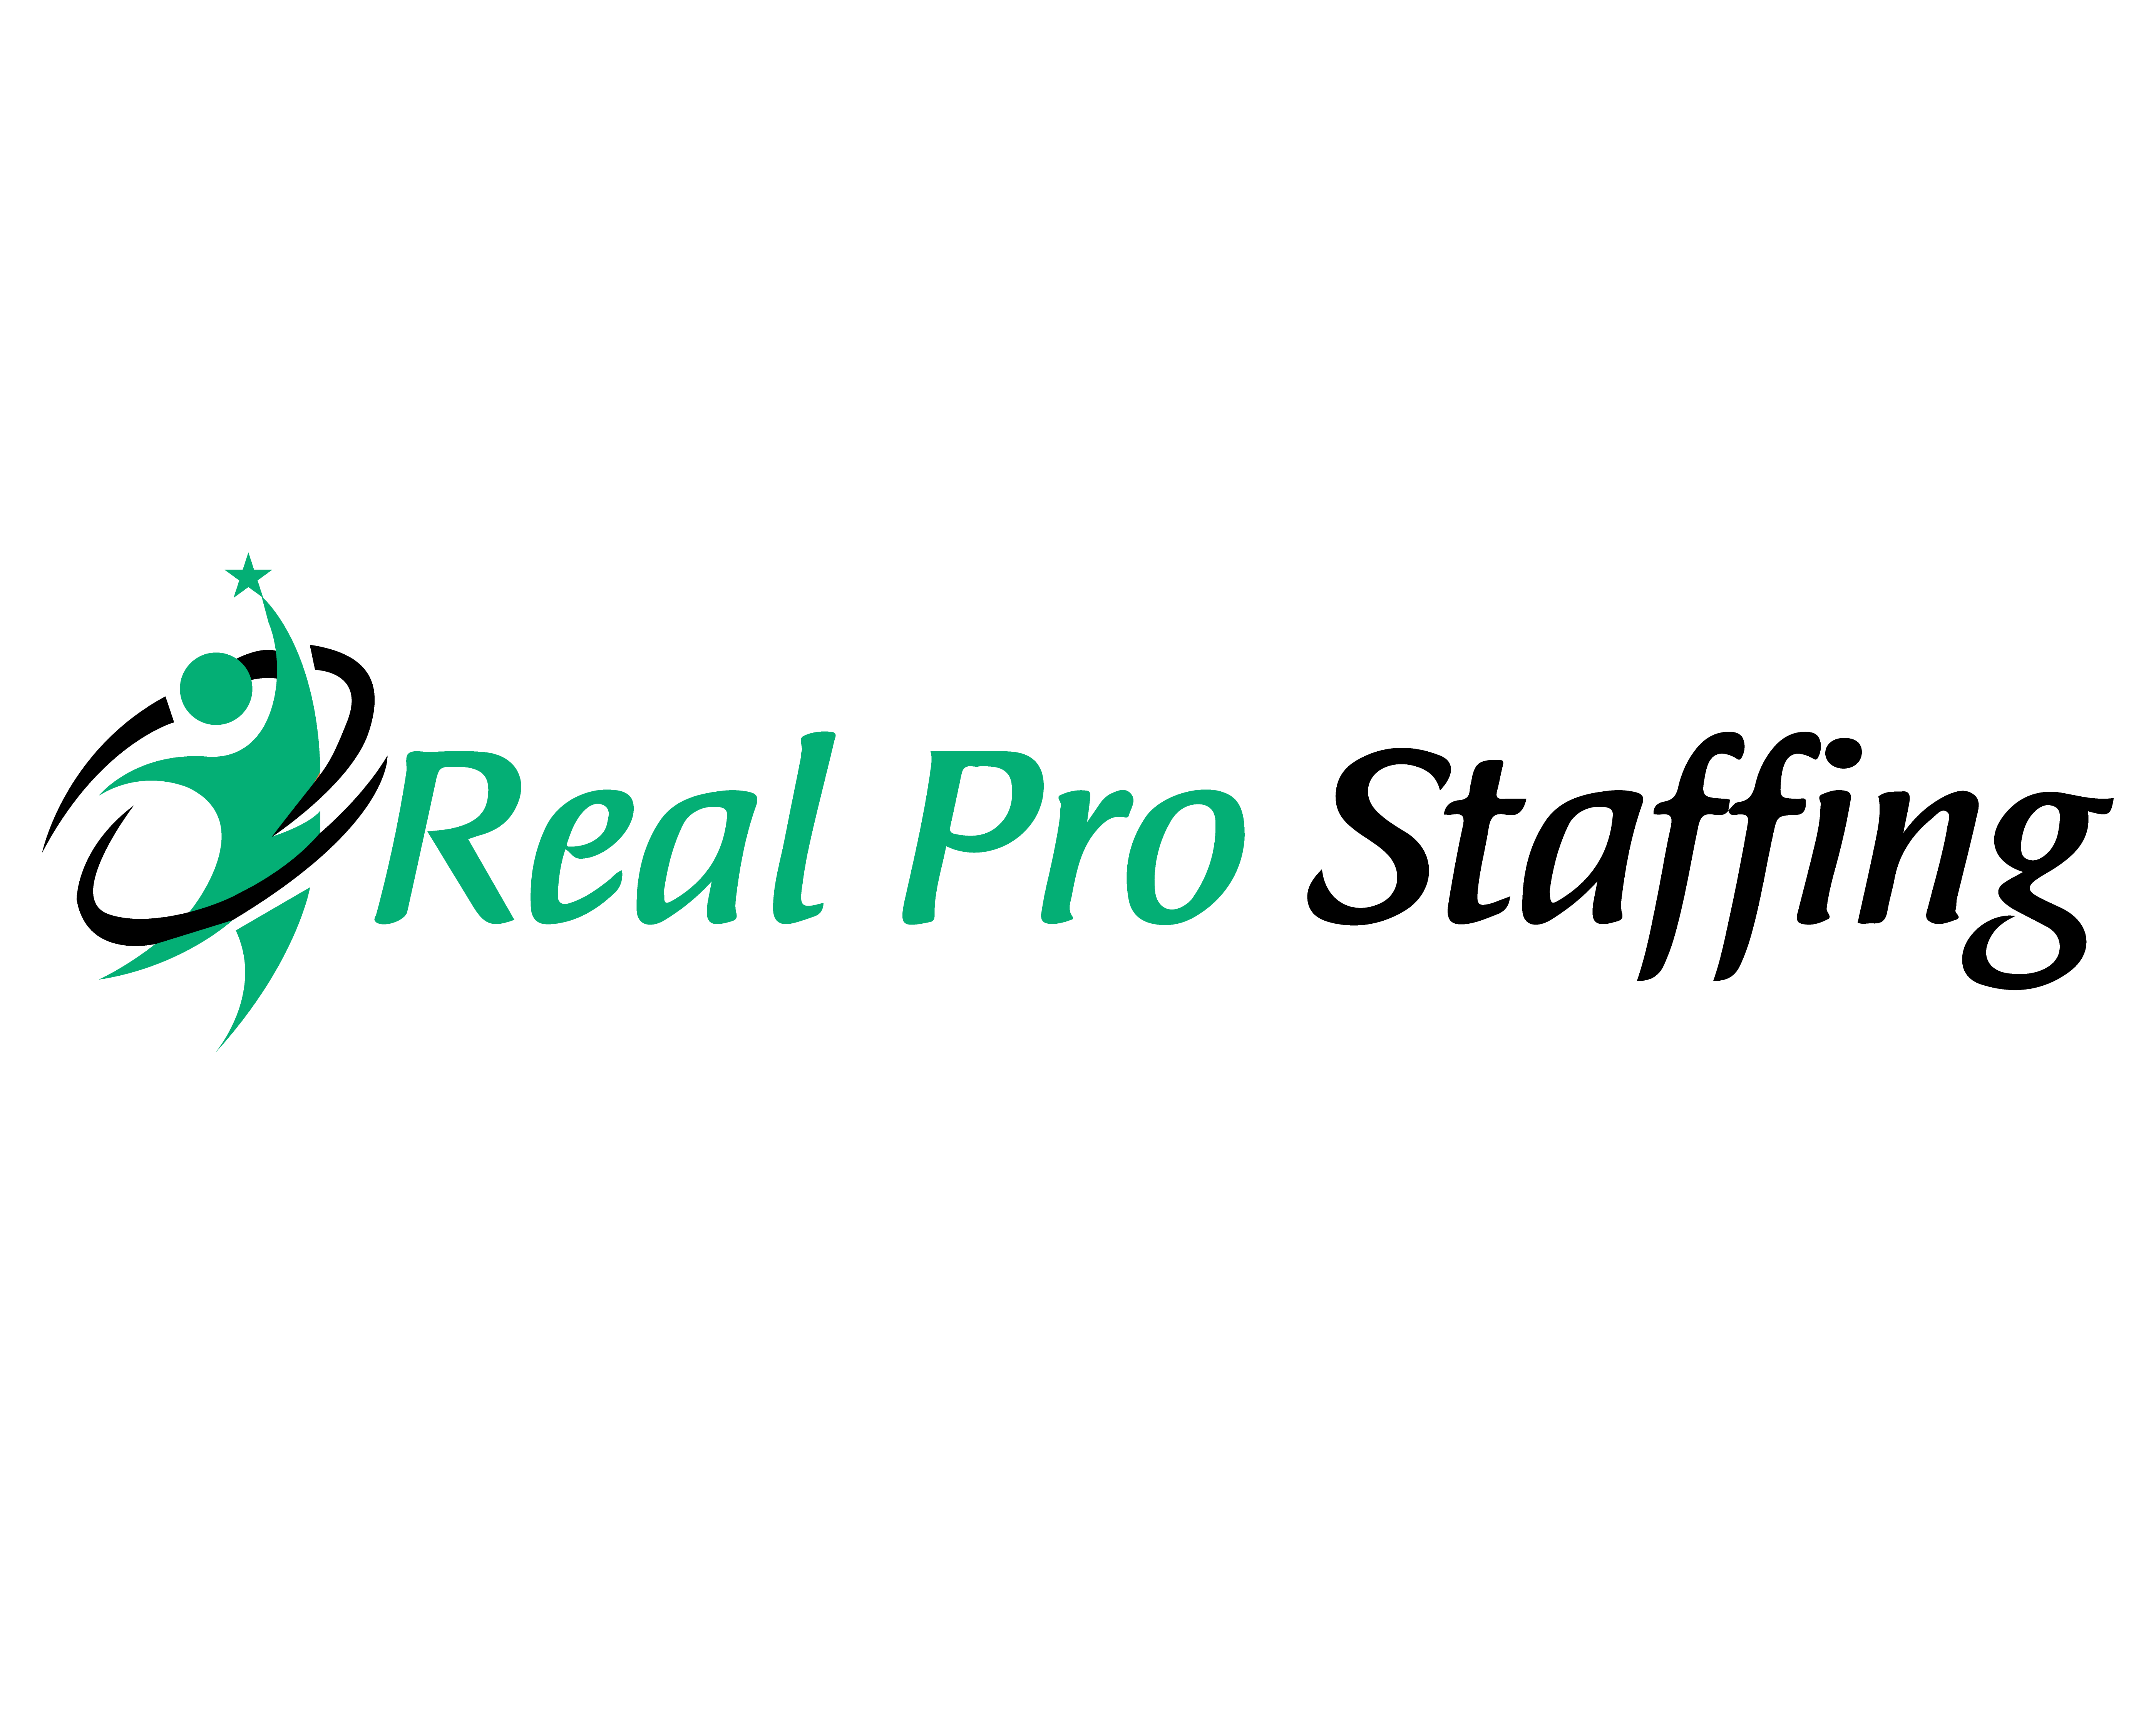 REAL PRO STAFFING